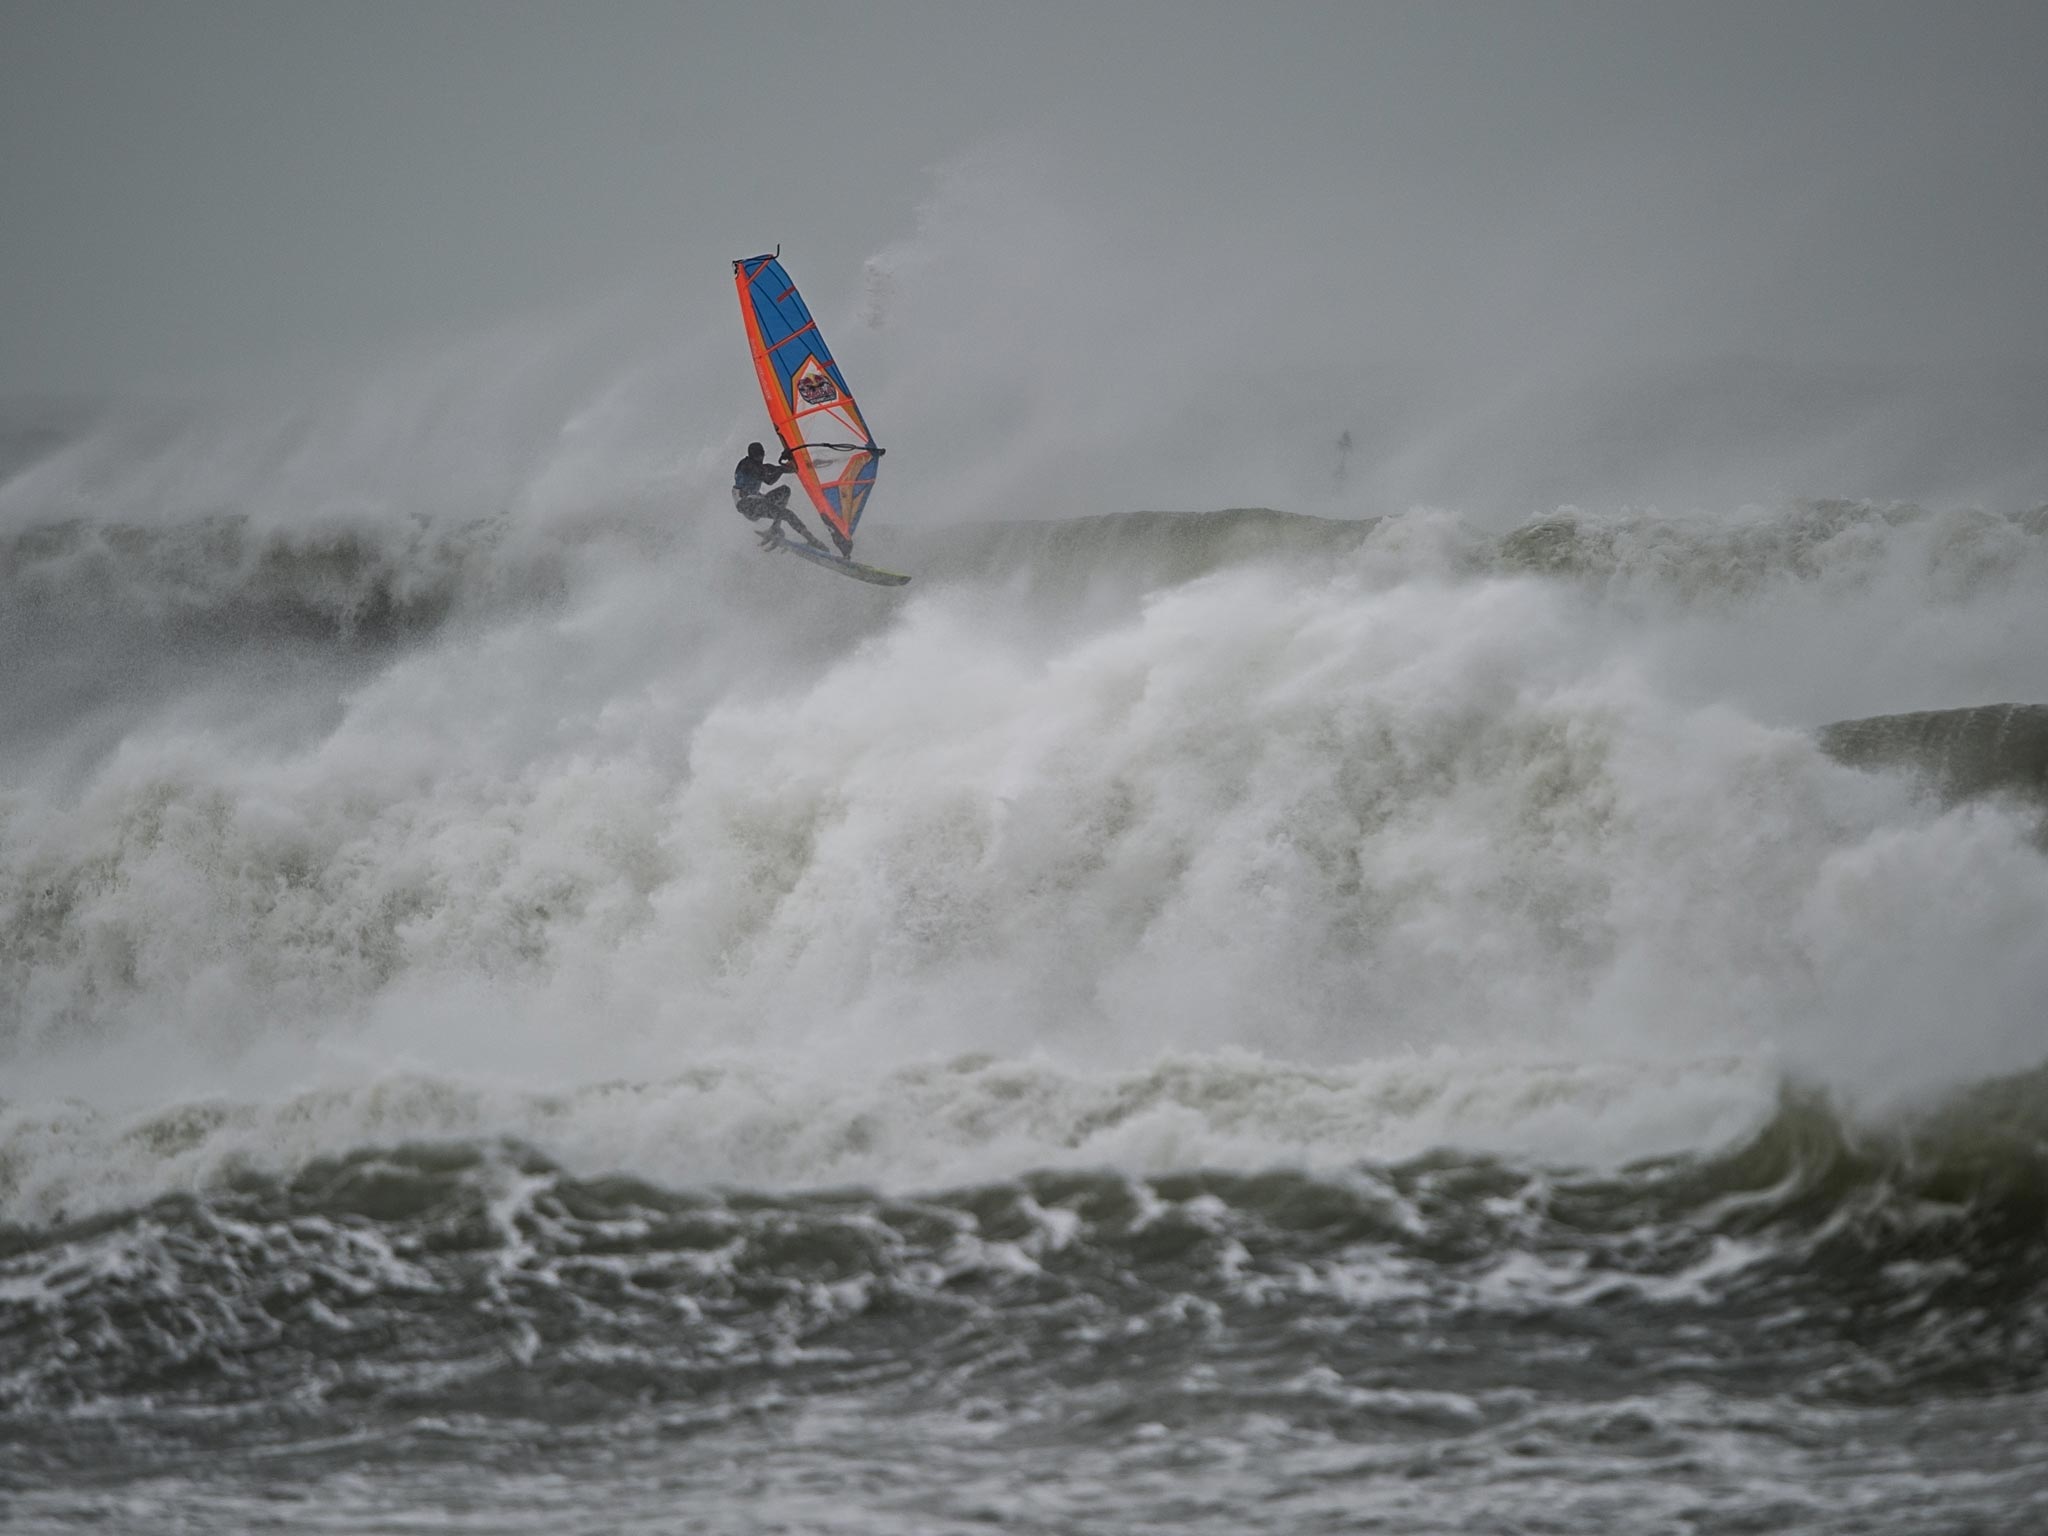 Winner Thomas Traversa rides the waves in 80mph winds